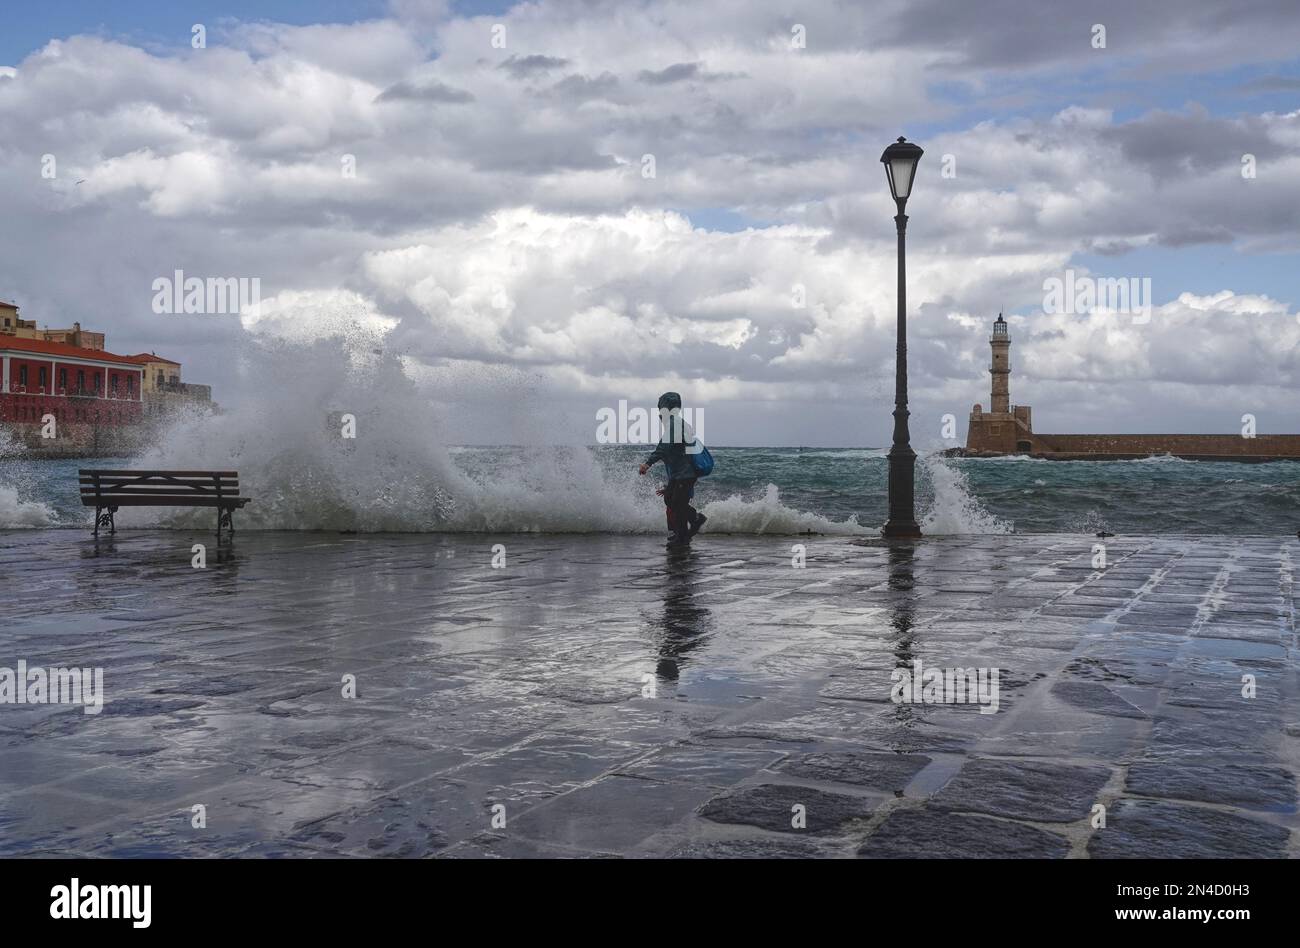 Wet, stormy weather and crashing waves at the quayside in the Venetian harbour of Chania old town in Crete, Greece Stock Photo